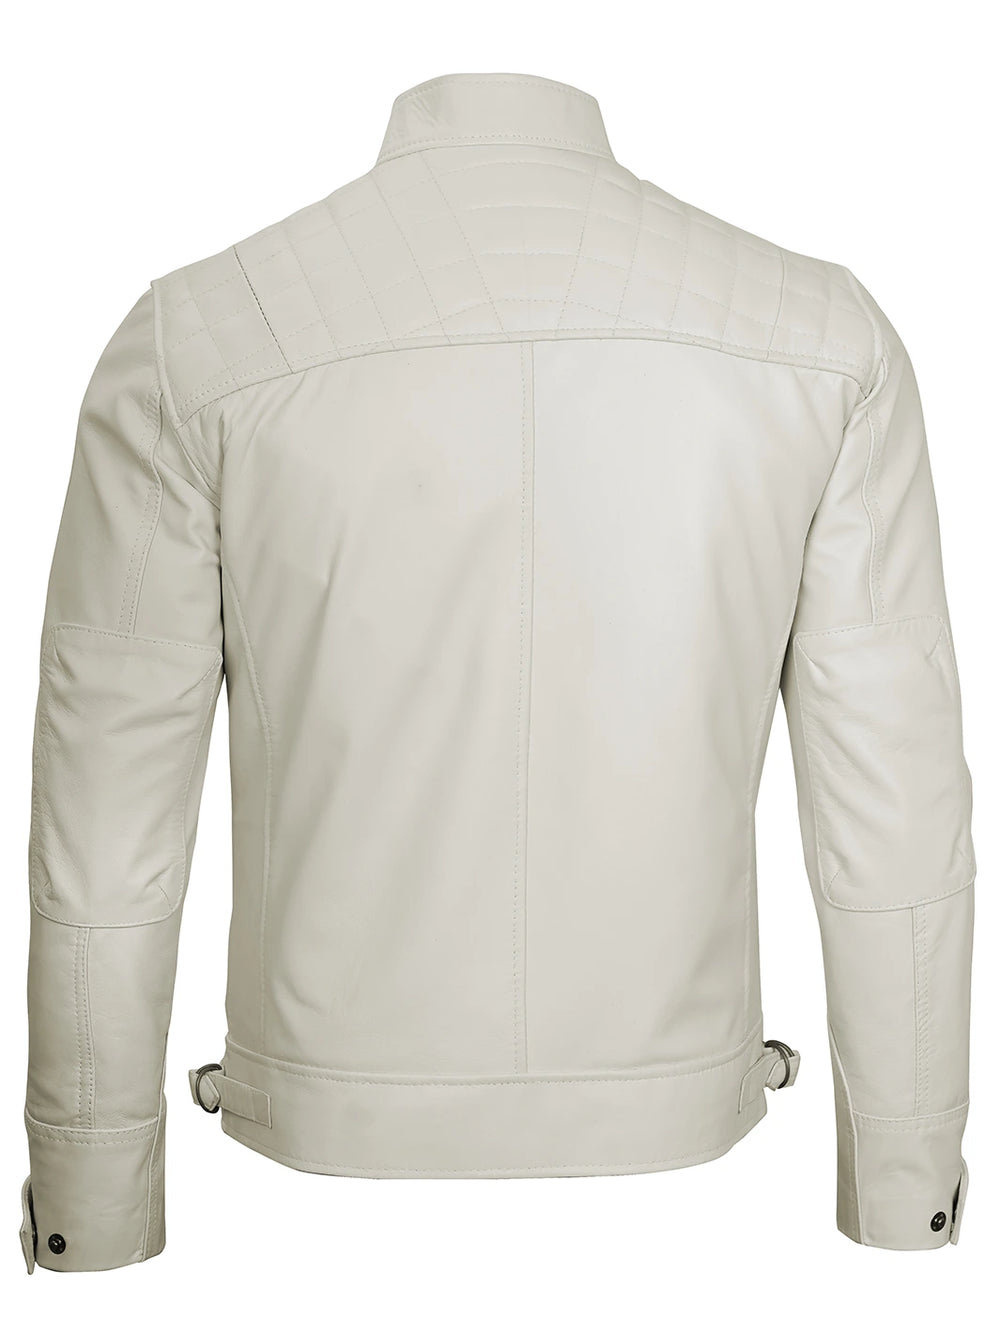 Mens real leather jacket off white